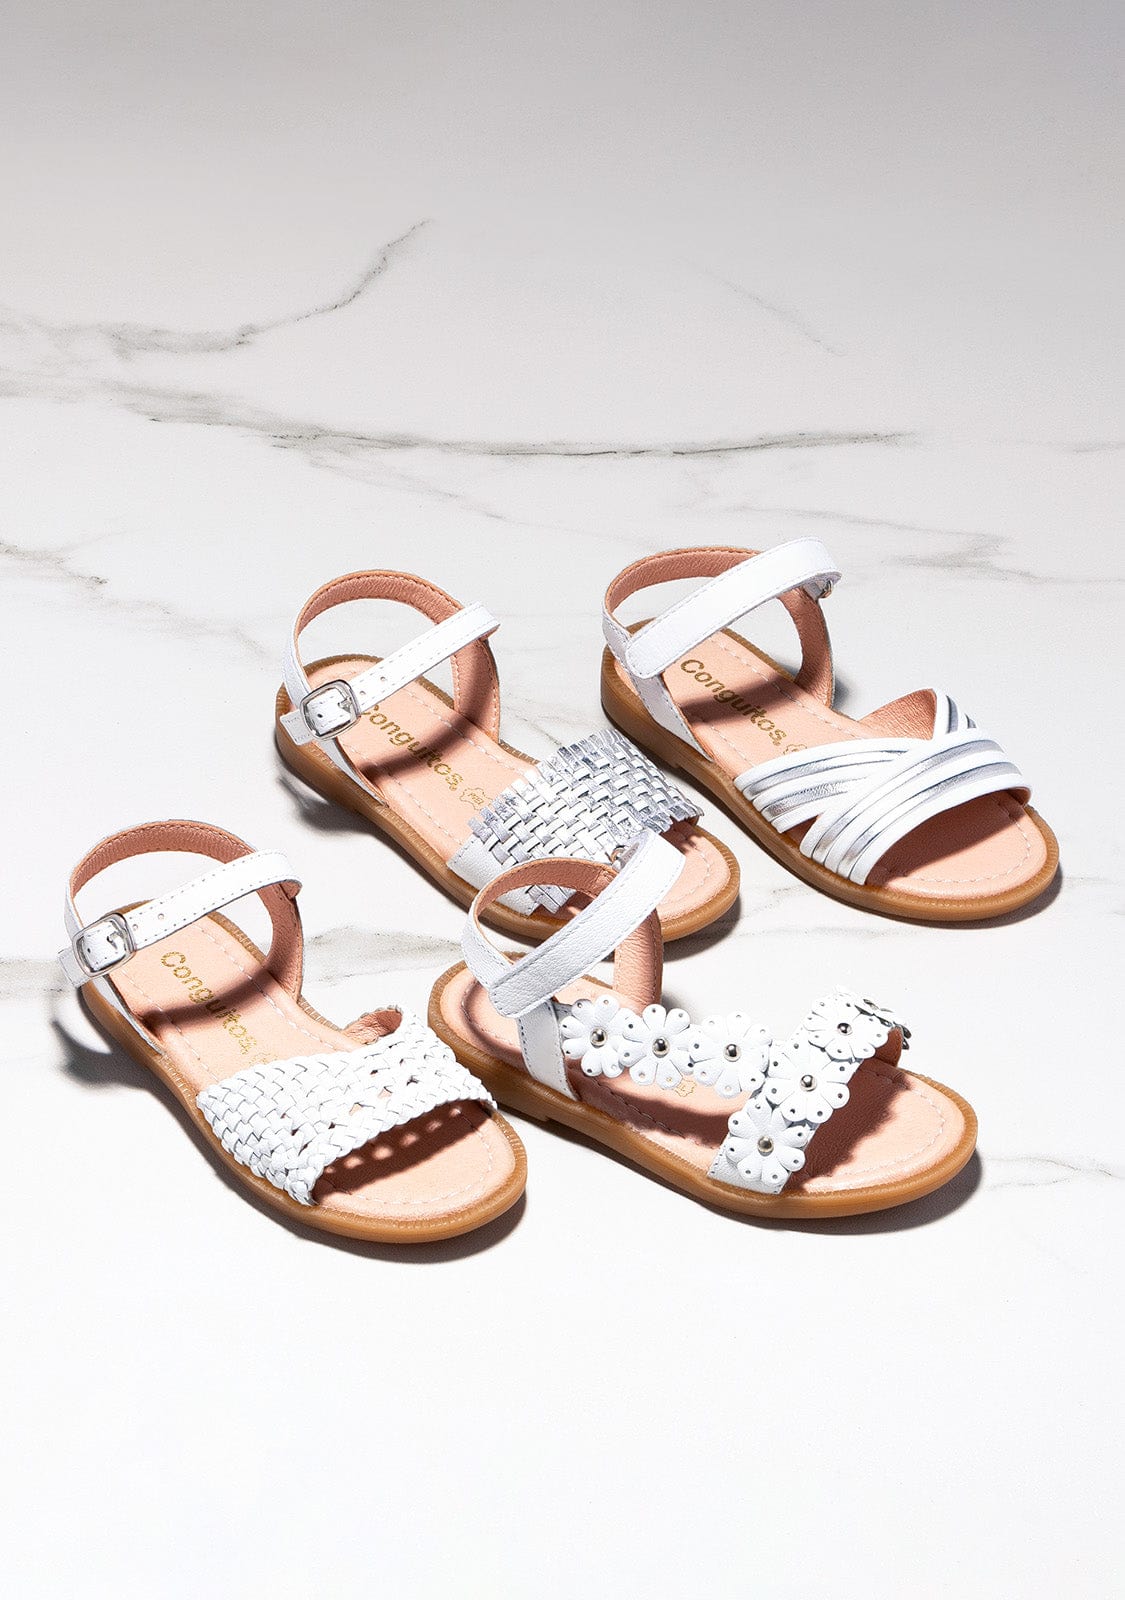 CONGUITOS Shoes Girl's White / Silver Braided Leather Sandals